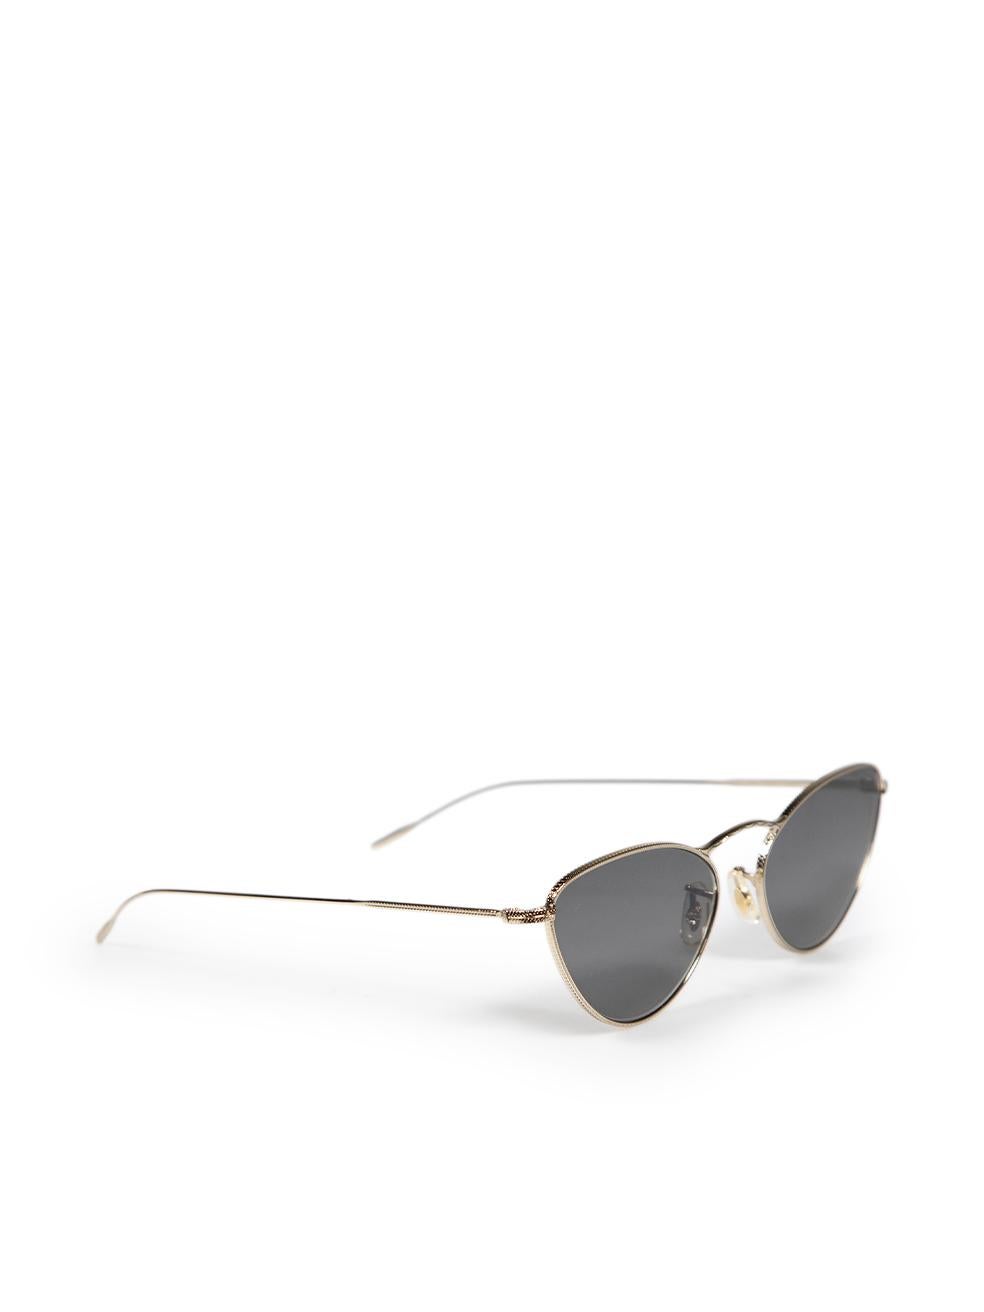 CONDITION is Very good. Hardly any visible wear to sunglasses is evident on this used Oliver Peoples designer resale item.
 
 
 
 Details
 
 
 Silver
 
 Metal
 
 Cat eye sunglasses
 
 Tinted grey lenses
 
 
 
 
 
 Composition
 
 Metal
 
 
 
 
 
